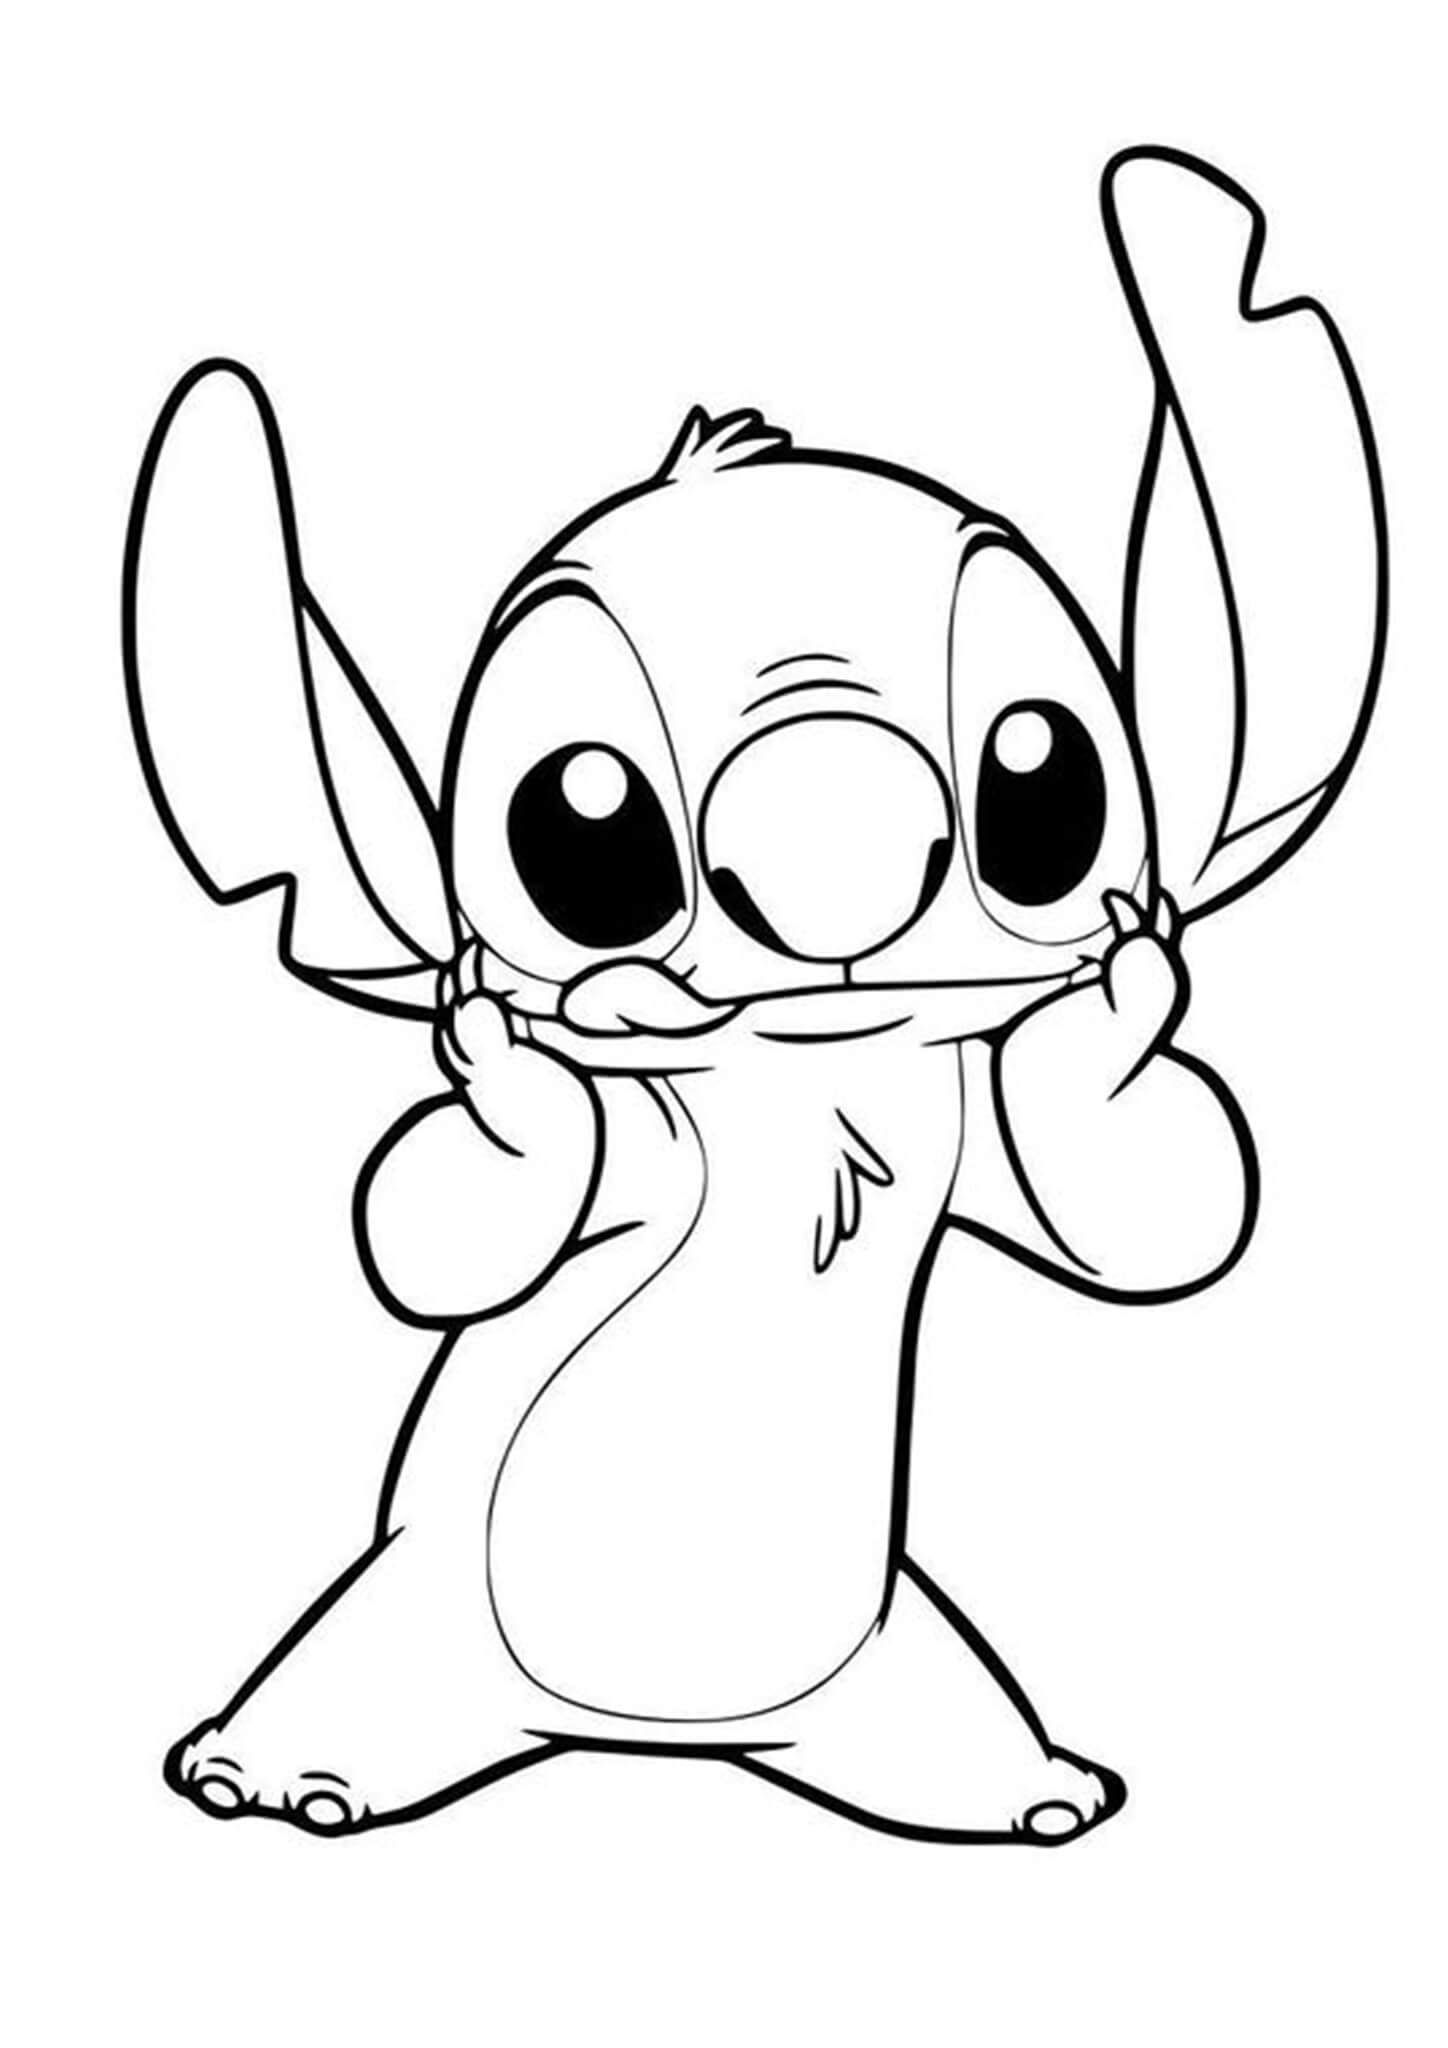 Free easy to print stitch coloring pages stitch coloring pages lilo and stitch drawings stitch drawing